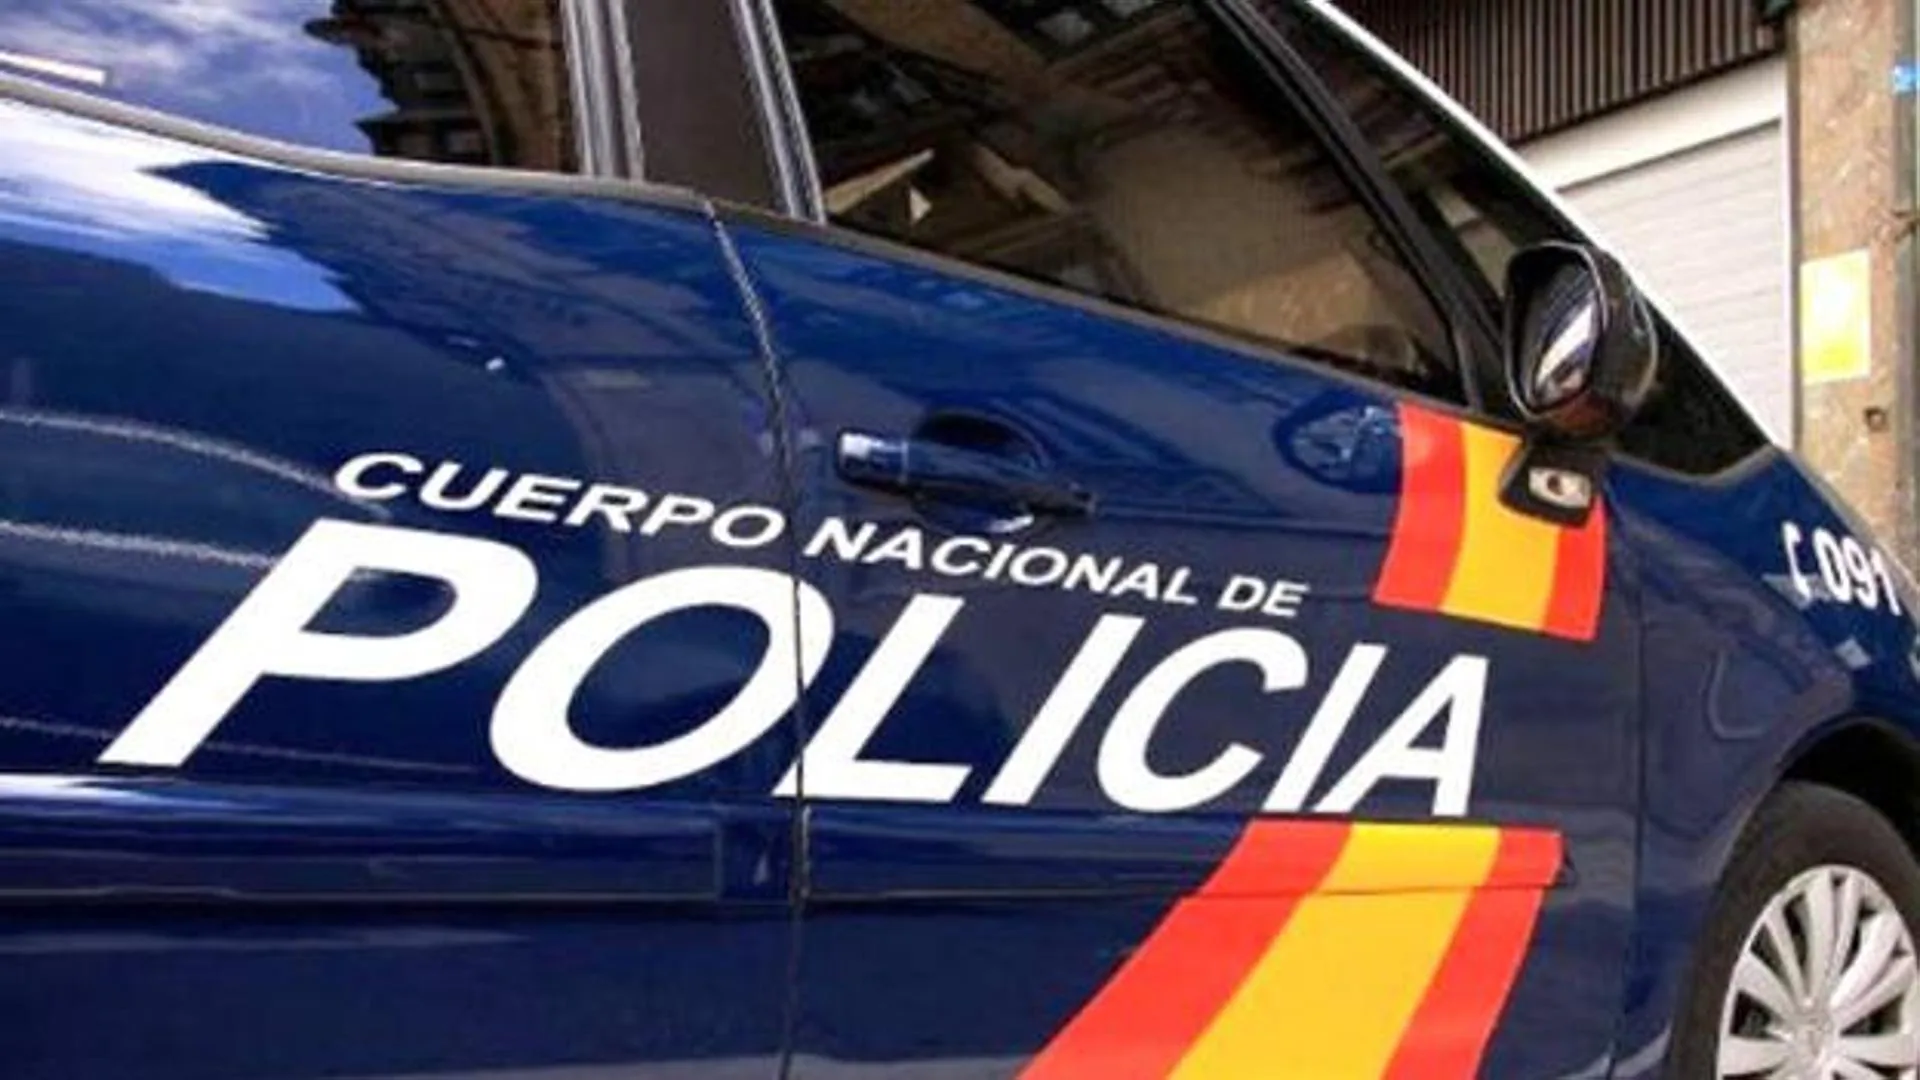 A national police officer is shot dead at a gas station in a town in Burgos